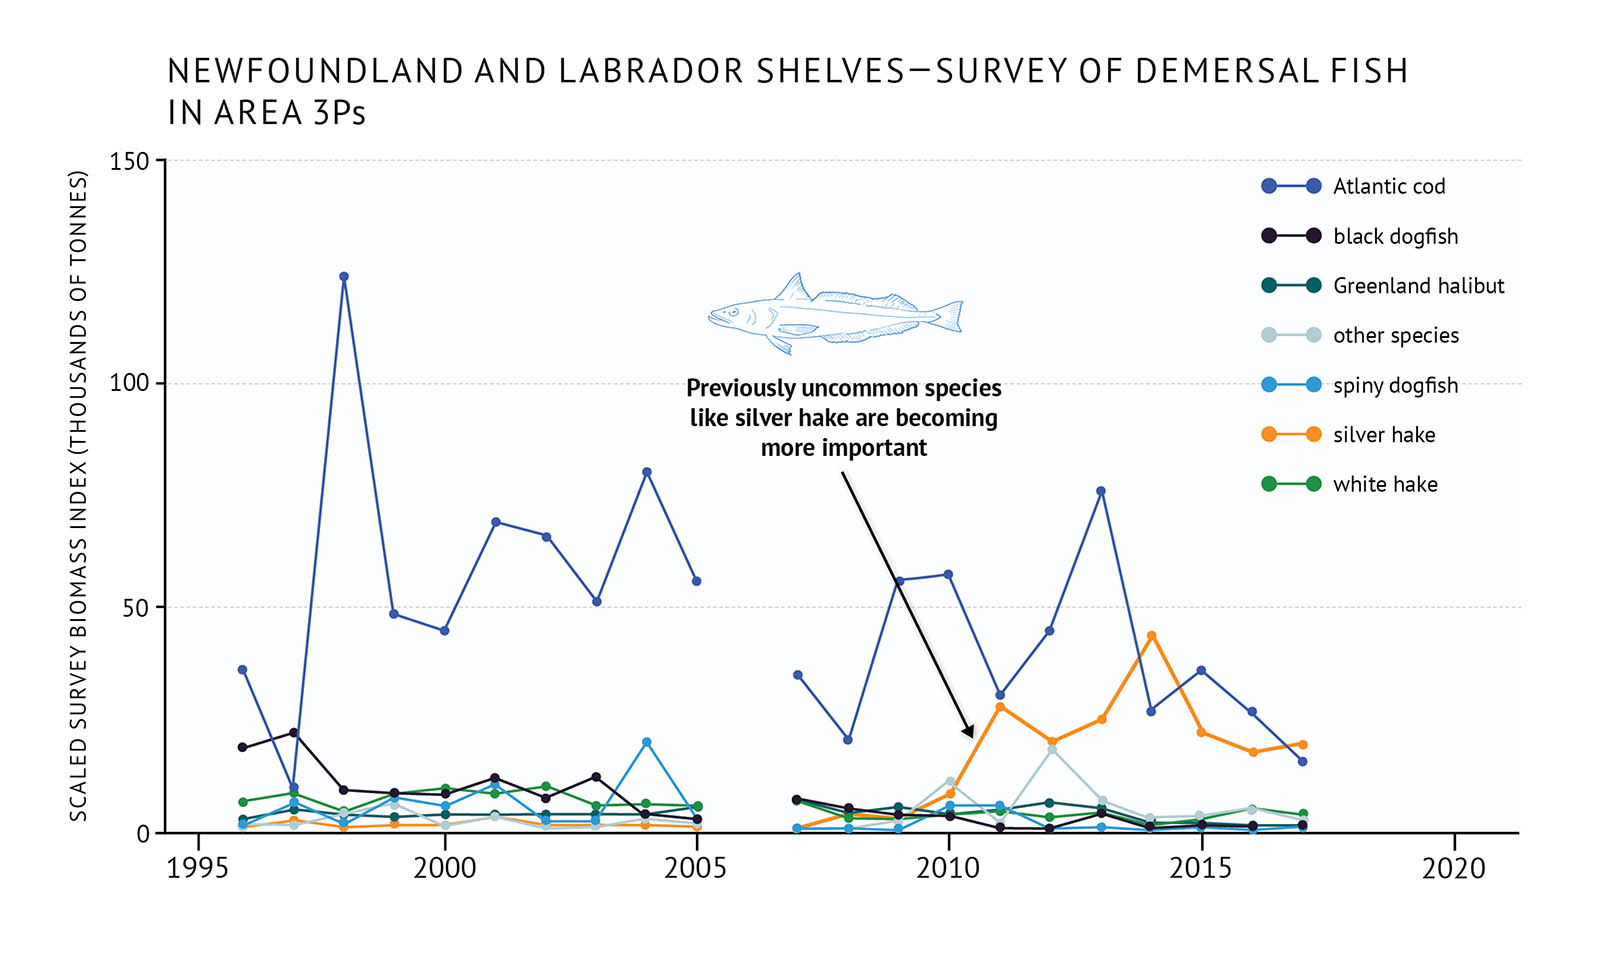 Figure 38: Survey biomass of individual demersal fish species in 3Ps on the Newfoundland and Labrador Shelves. A line graph illustrates the survey biomass for demersal fish species in the 3Ps NAFO zone of the Newfoundland and Labrador Shelves. Text above the graph says “Newfoundland and Labrador Shelves Survey of Demersal Fish in Area 3Ps”. The vertical axis on the left shows the scaled survey biomass index in units of thousands of tonnes from 0 to 150 in increments of 50. The bottom horizontal axis shows the years between 1995 and 2020 in 5 year increments. The survey biomass for each demersal fish species is represented by different coloured lines on the same graph. The data starts in 1996 and ends in 2017, but there is no data for 2006. A legend appears on the right. A dark blue data line illustrates the survey biomass trend for Atlantic cod. A black data line illustrates the survey biomass trend for black dogfish. A dark green data line illustrates the survey biomass trend for Greenland halibut. A light blue data line illustrates the survey biomass trend for other species. A blue data line illustrates the survey biomass trend for spiny dogfish. An orange data line illustrates the survey biomass trend for silver hake. A green data line illustrates the survey biomass trend for white hake. Atlantic cod has the highest biomass of species in the graph in most years. There is a peak at approximately 125 thousand tonnes in 1998, but it generally fluctuates between 25 to 80 thousand tonnes. It decreases from 2015. The other species generally stay below 10 thousand tonnes. The black dogfish biomass is near 20 thousand tonnes in the mid-1990s, but then decreases below 10 thousand toones and decreases again in the 2010s. The Greenland halibut is near 5 thousand tonnes throughout the timespan. Spiny dogfish is generally near or below 5 thousand tonnes with a couple of higher years in the early 2000s approaching 10 to 20 thousand tonnes. Silver hake is near 5 thousand tonnes until the 2010s when it begins to increase and fluctuates around 20 thousand tonnes with a peak of near 50 thousand tonnes in 2014. White hake is generally fluctuates around 5 thousand tonnes with a couple of years approaching 10 thousand tonnes in the early 2000s. A small, light blue outline-drawing of a silver hake is placed above the data lines near the middle of the graph. Below the drawing there is text which states “Previously uncommon species like silver hake are becoming more important”. An arrow points from the text to the orange line in the 2010s.